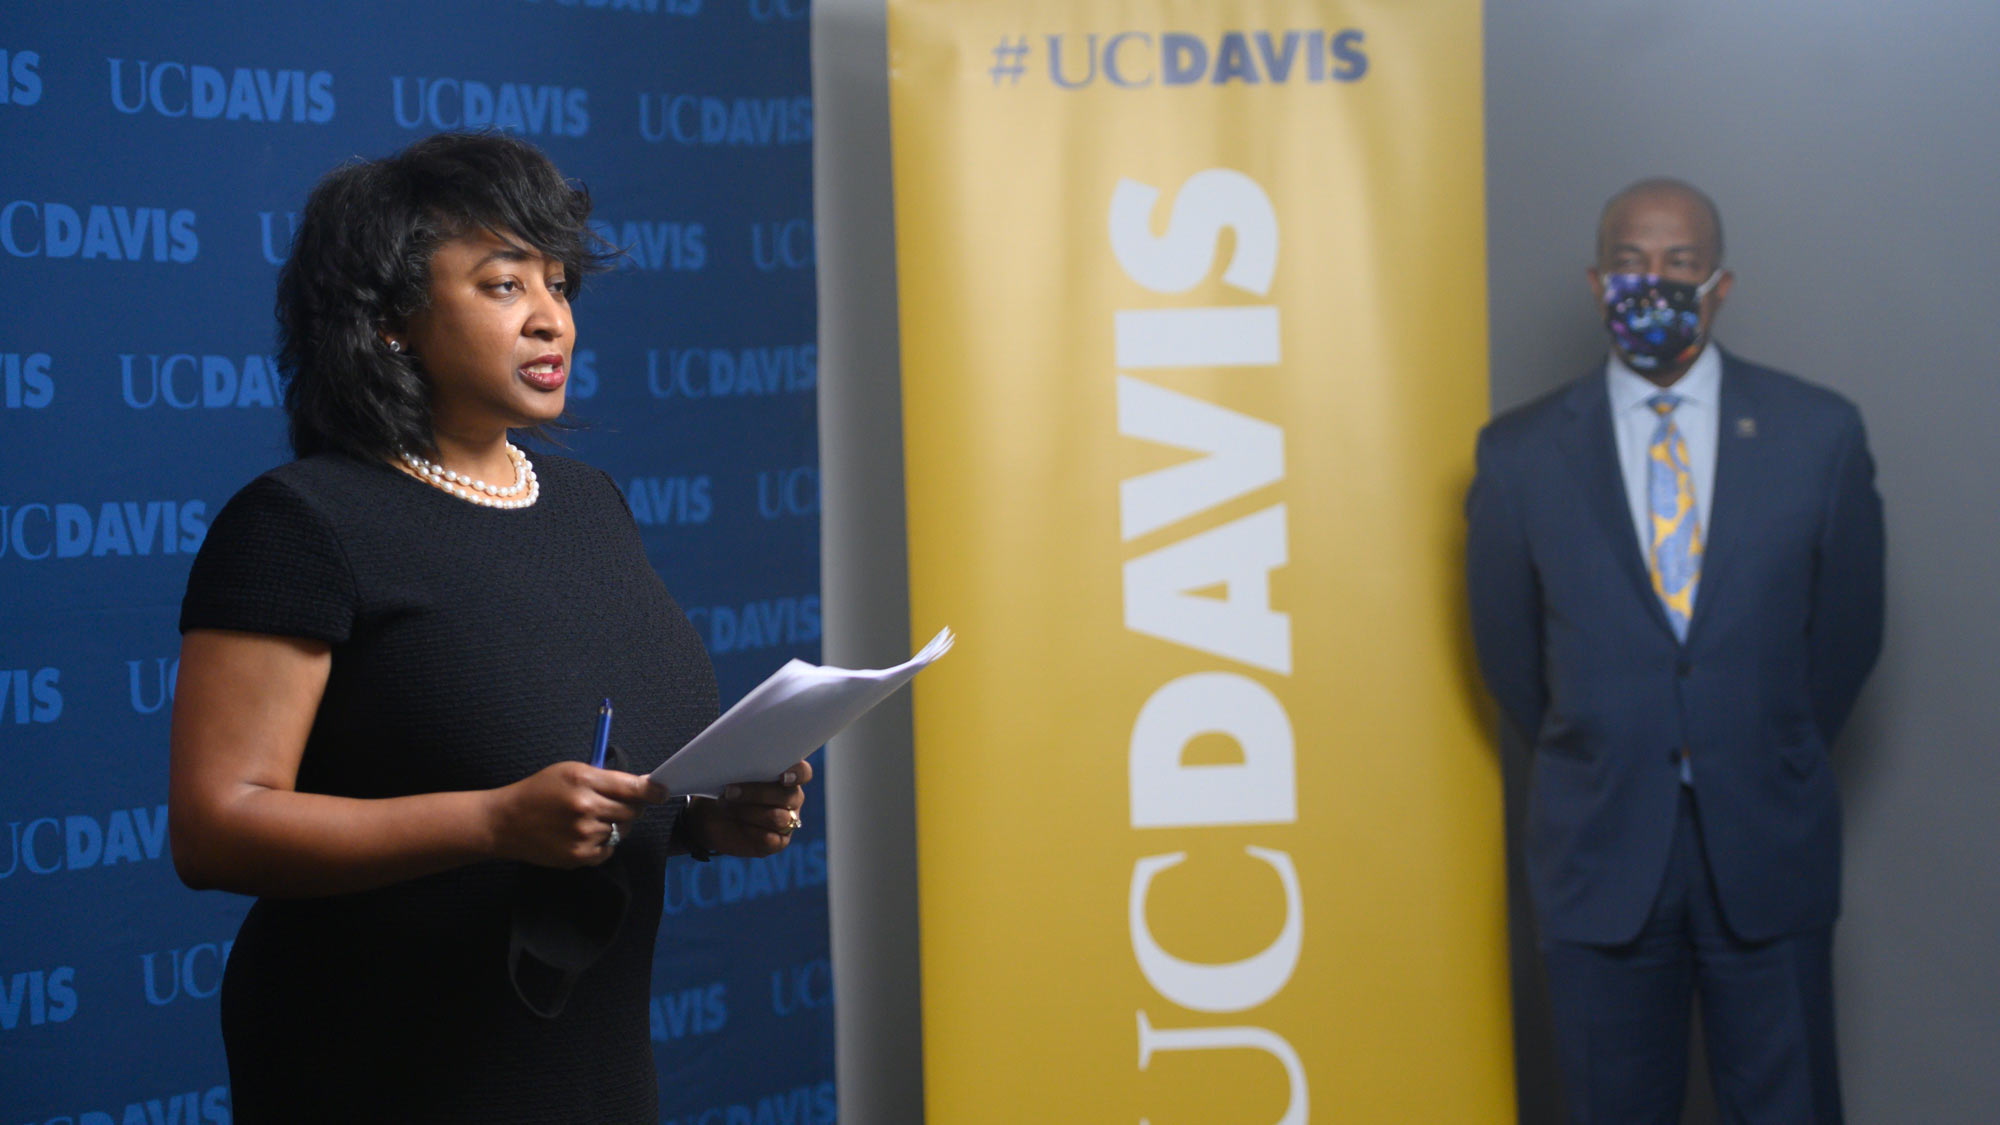 Vice Chancellor Renetta Garrison Tull and Chancellor Gary S. May gave remarks as part of the campus’s online observance of George Floyd’s death, June 2, 2020. (Gregory Urquiaga/UC Davis)